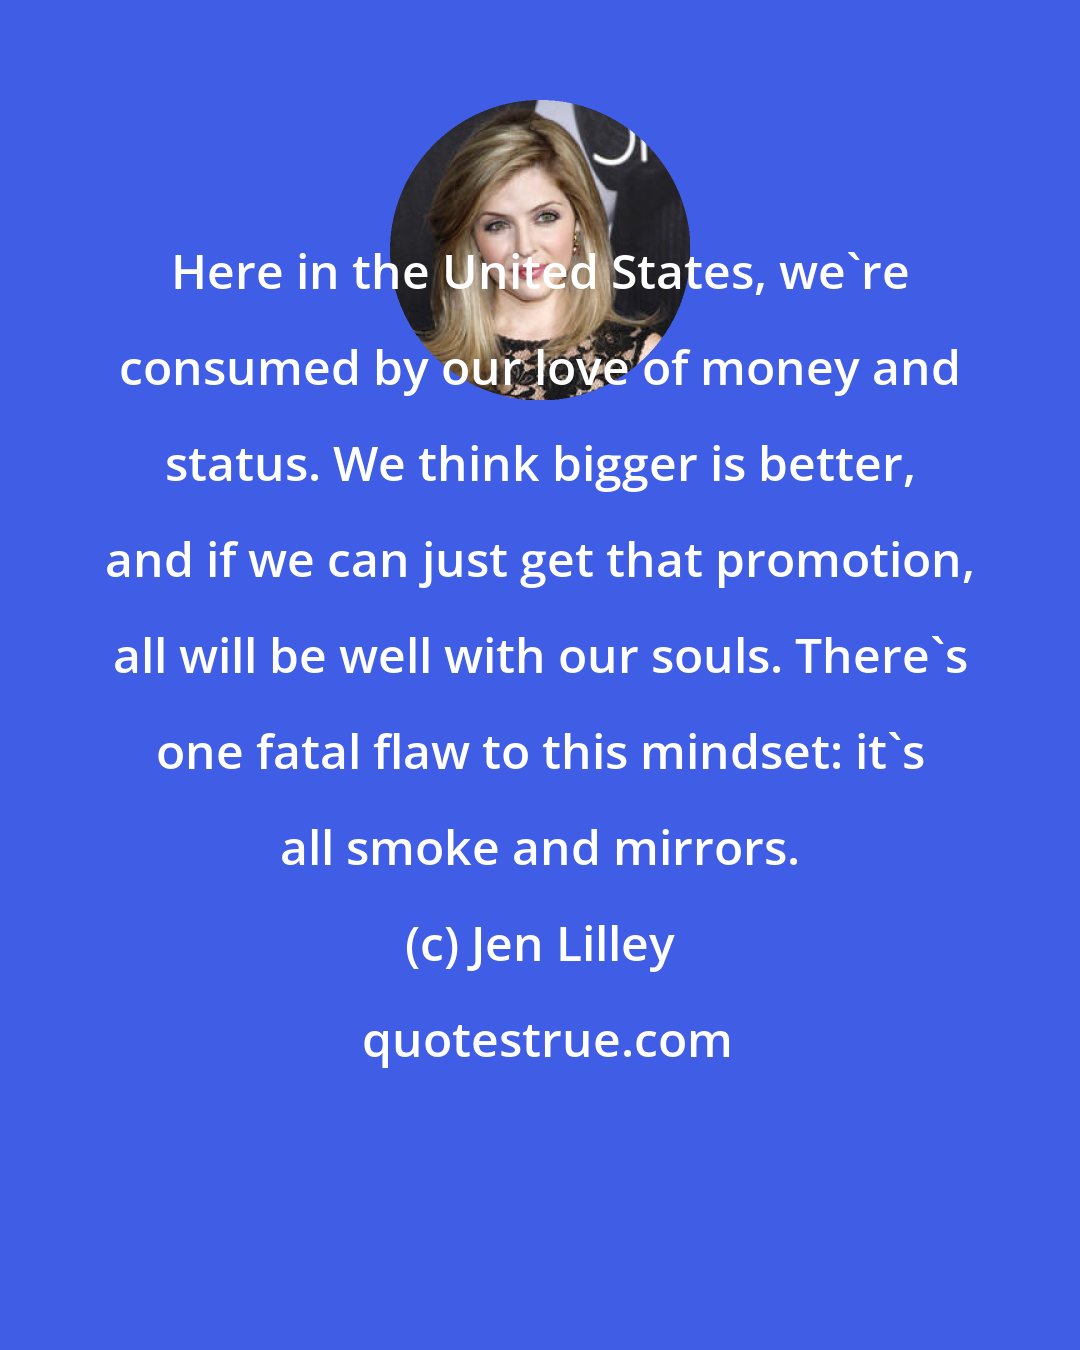 Jen Lilley: Here in the United States, we're consumed by our love of money and status. We think bigger is better, and if we can just get that promotion, all will be well with our souls. There's one fatal flaw to this mindset: it's all smoke and mirrors.